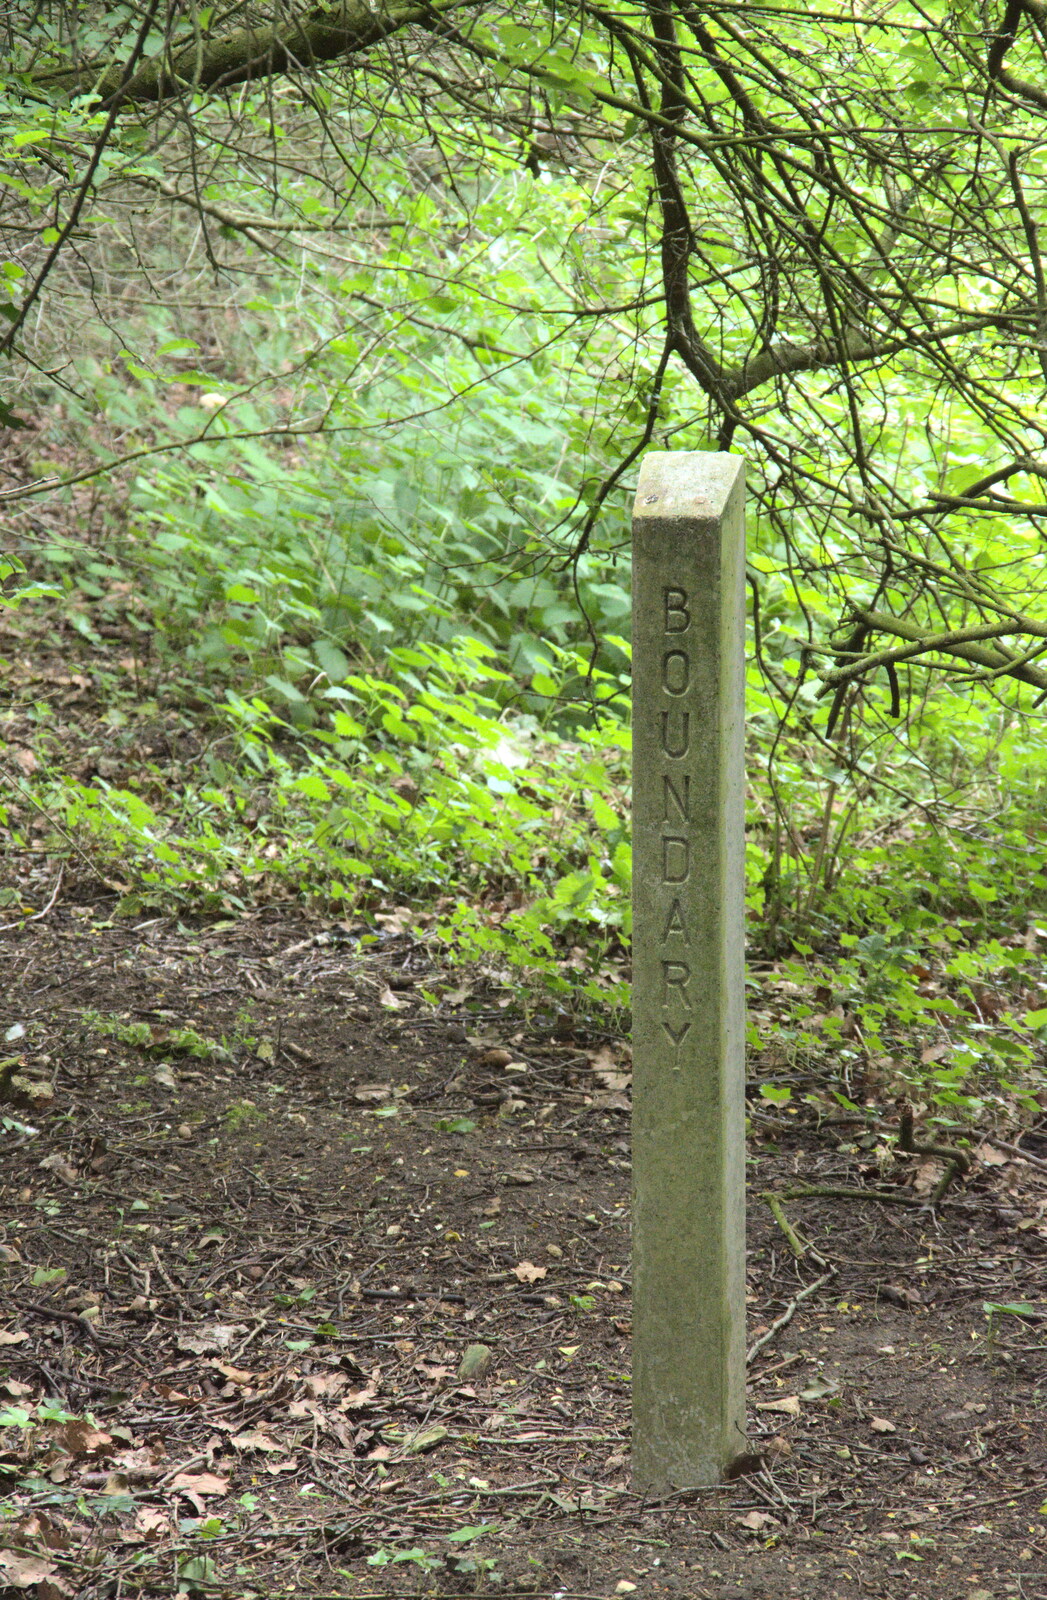 A boundary post from The Quest for Rapsy Tapsy Lane, Eye, Suffolk - 6th May 2020